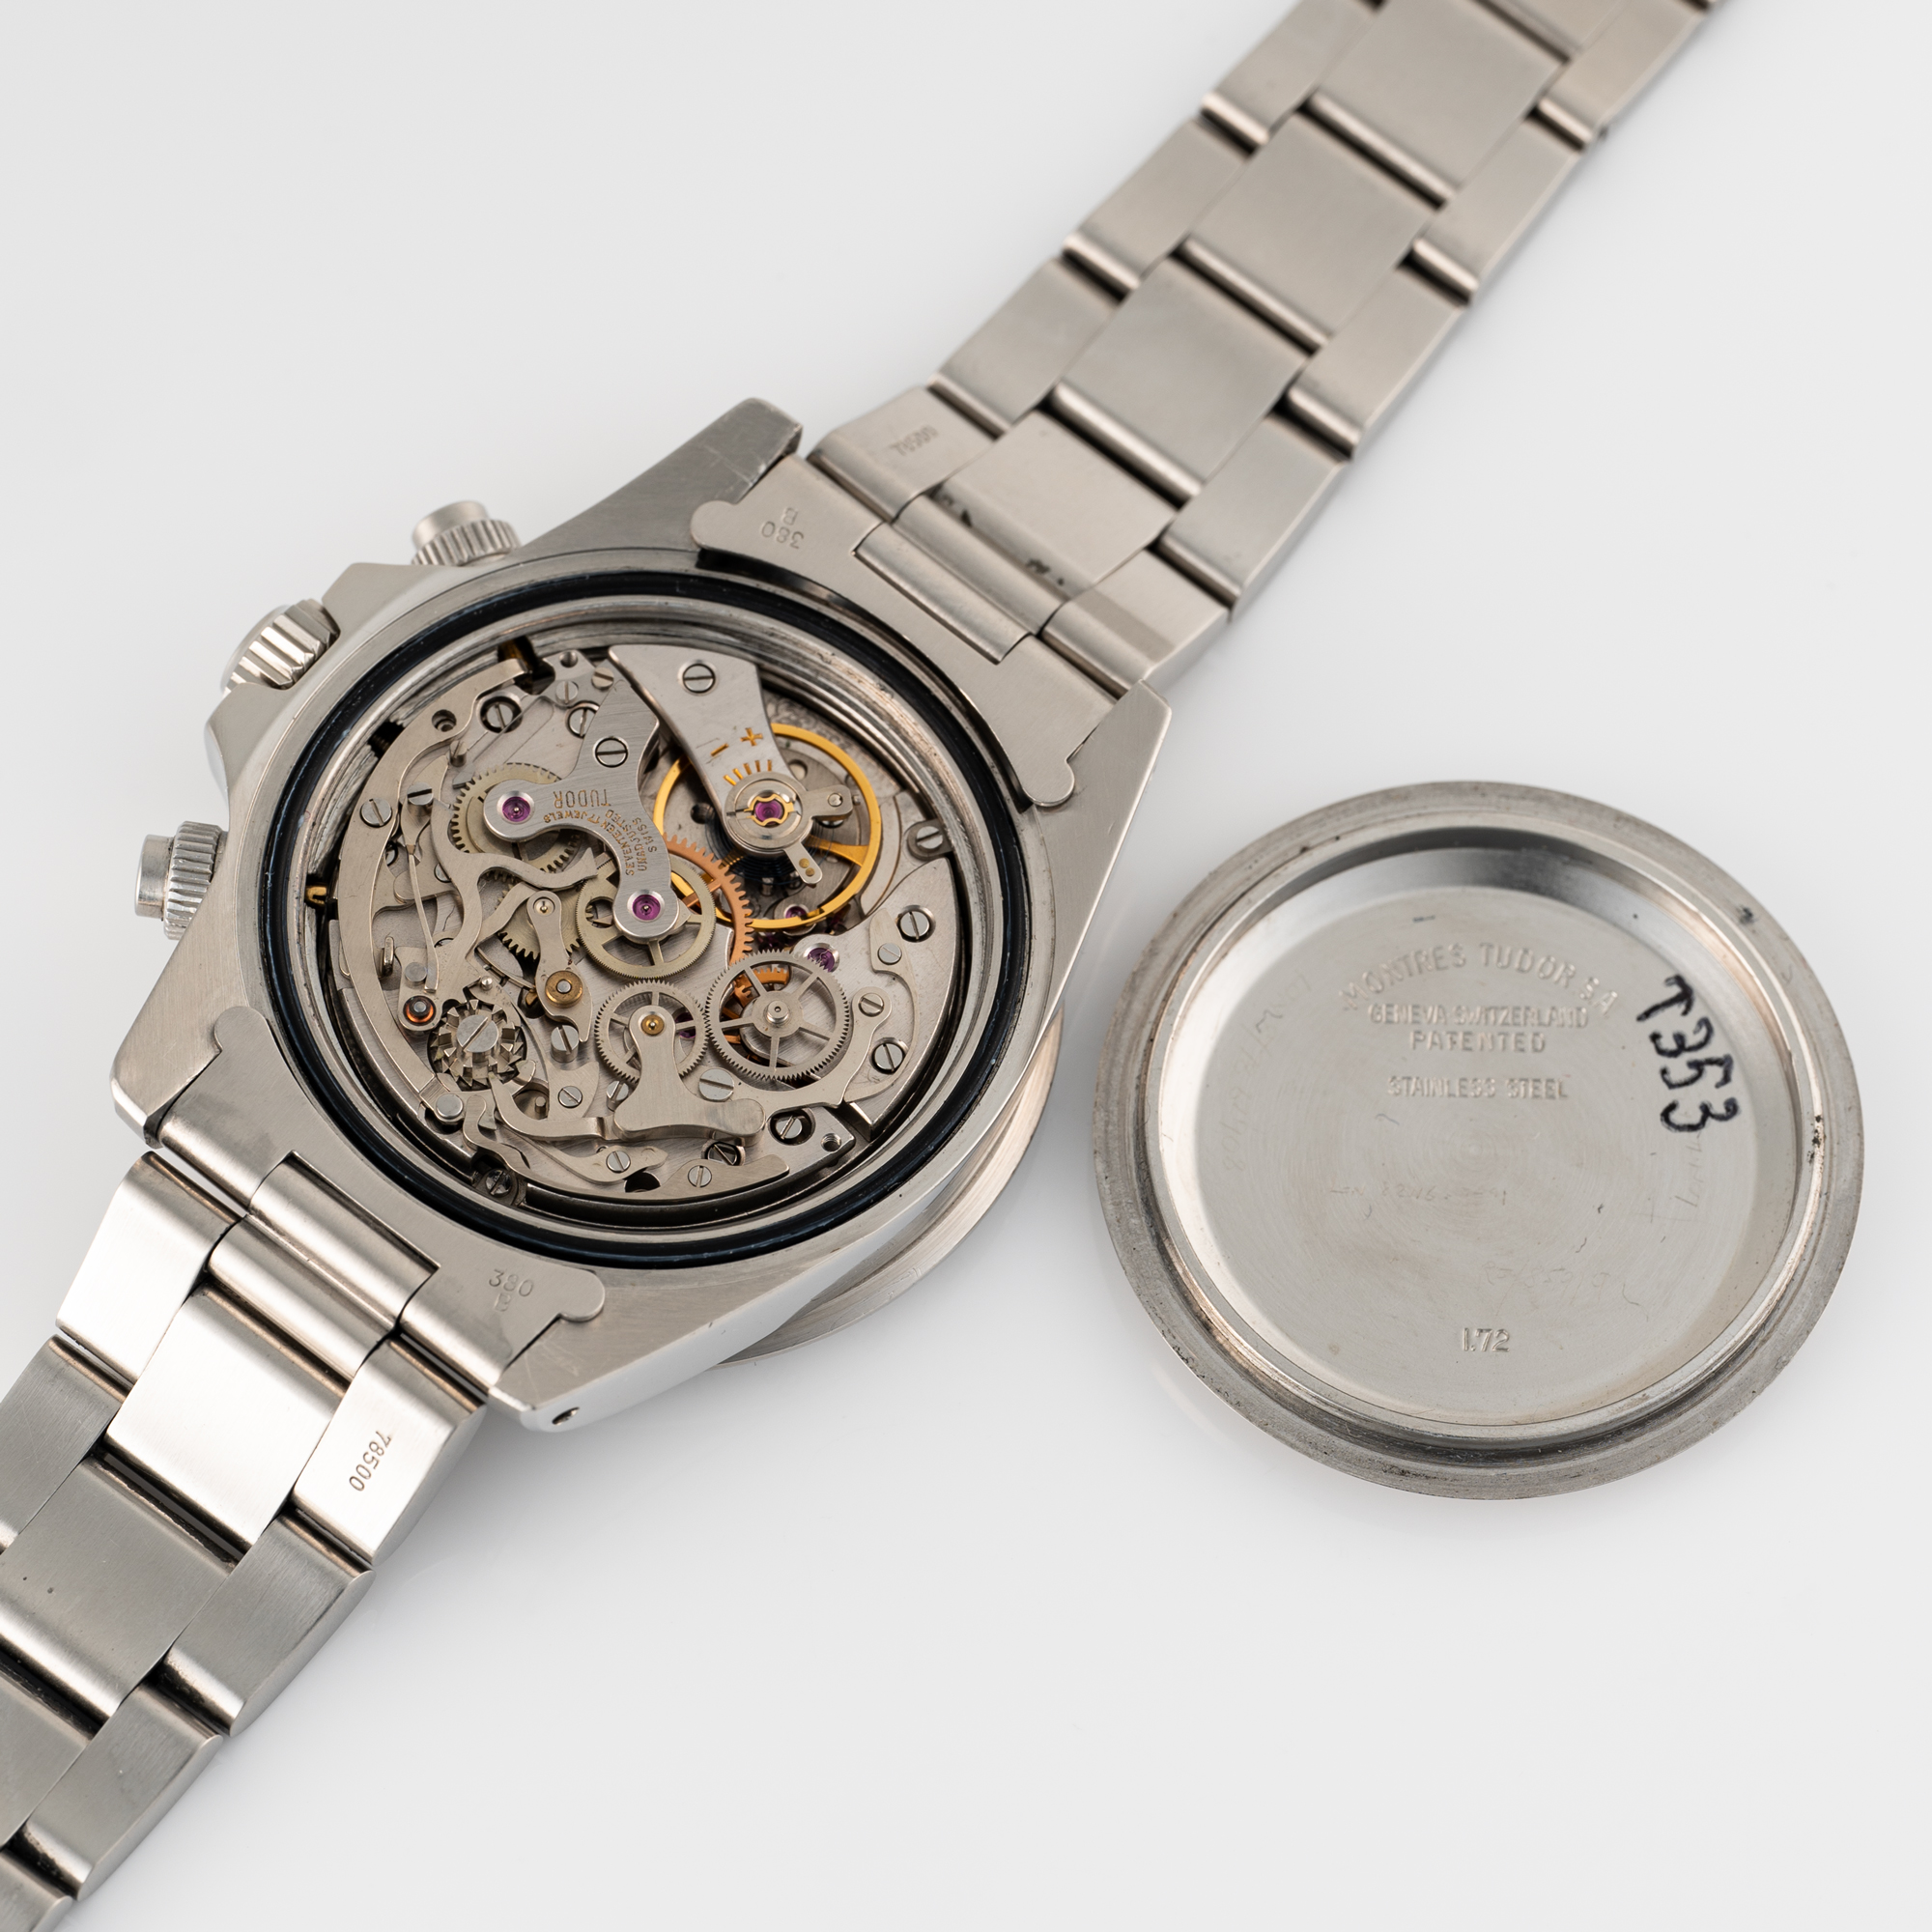 A GENTLEMAN'S SIZE STAINLESS STEEL ROLEX TUDOR OYSTERDATE MONTE CARLO CHRONOGRAPH BRACELET WATCH - Image 9 of 10